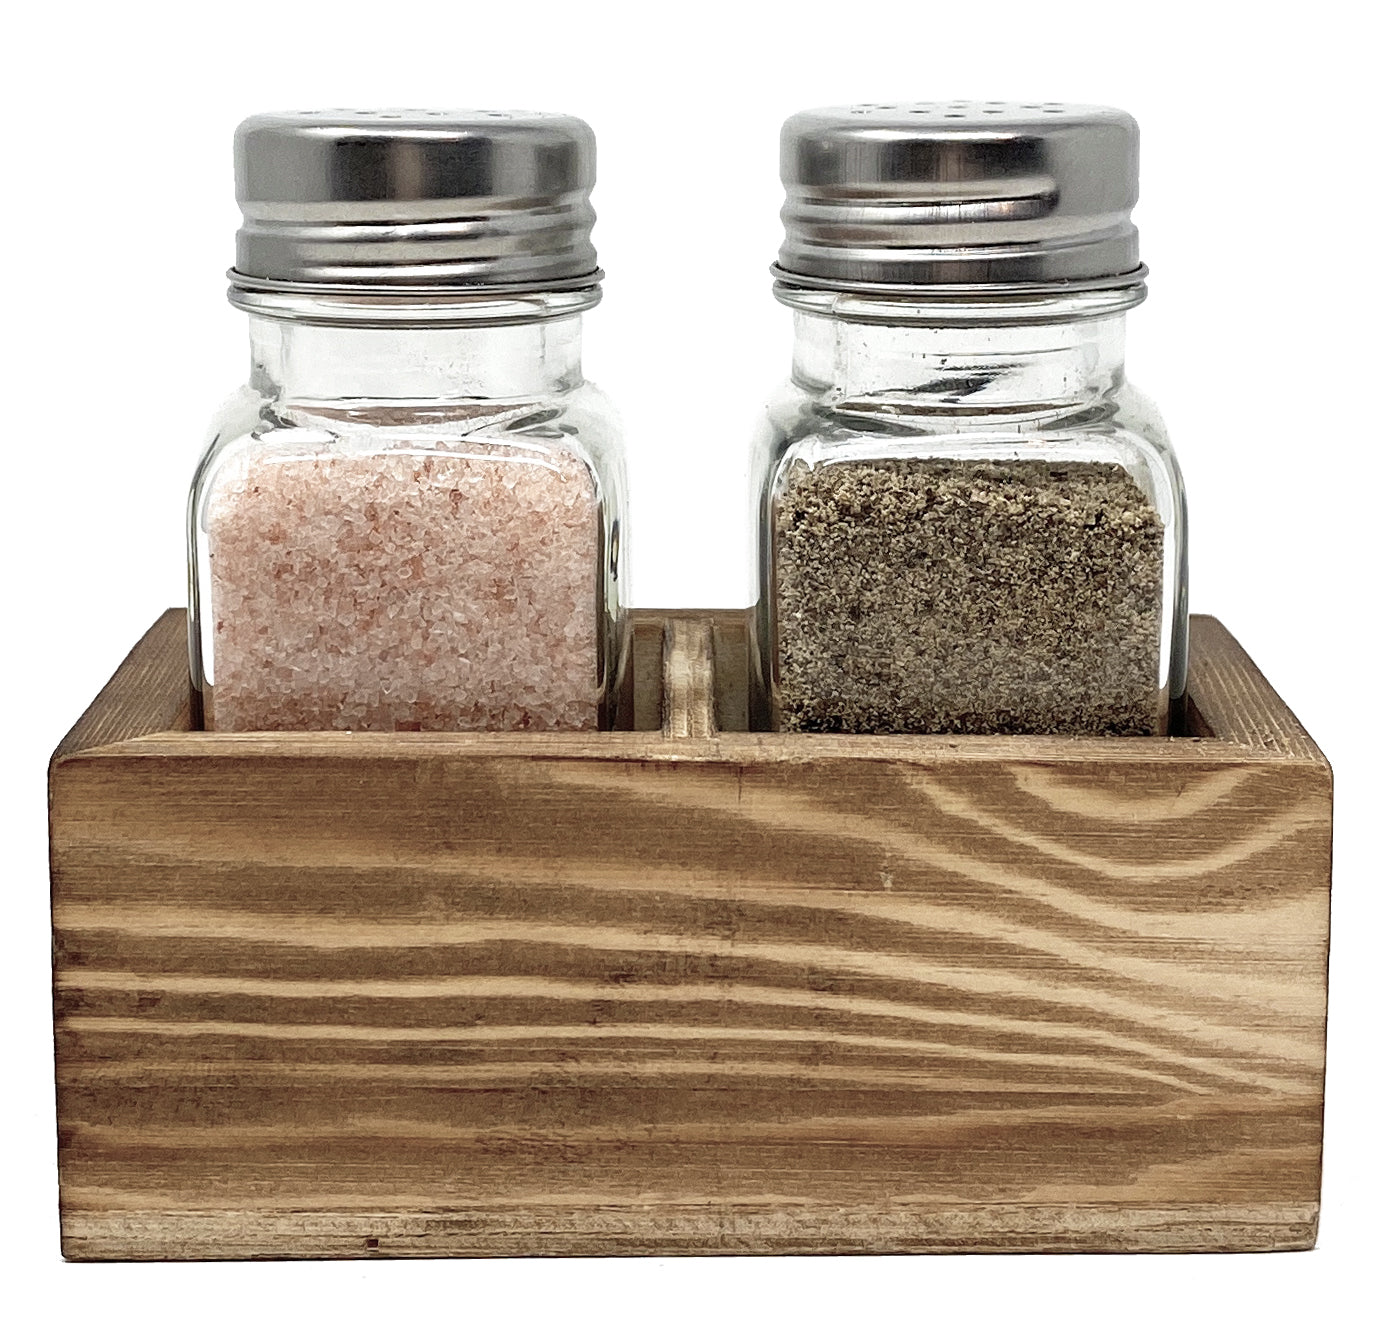 Salt and Pepper Shaker Set with Wood Holder, Glass Containers, Stainless Steel Lids